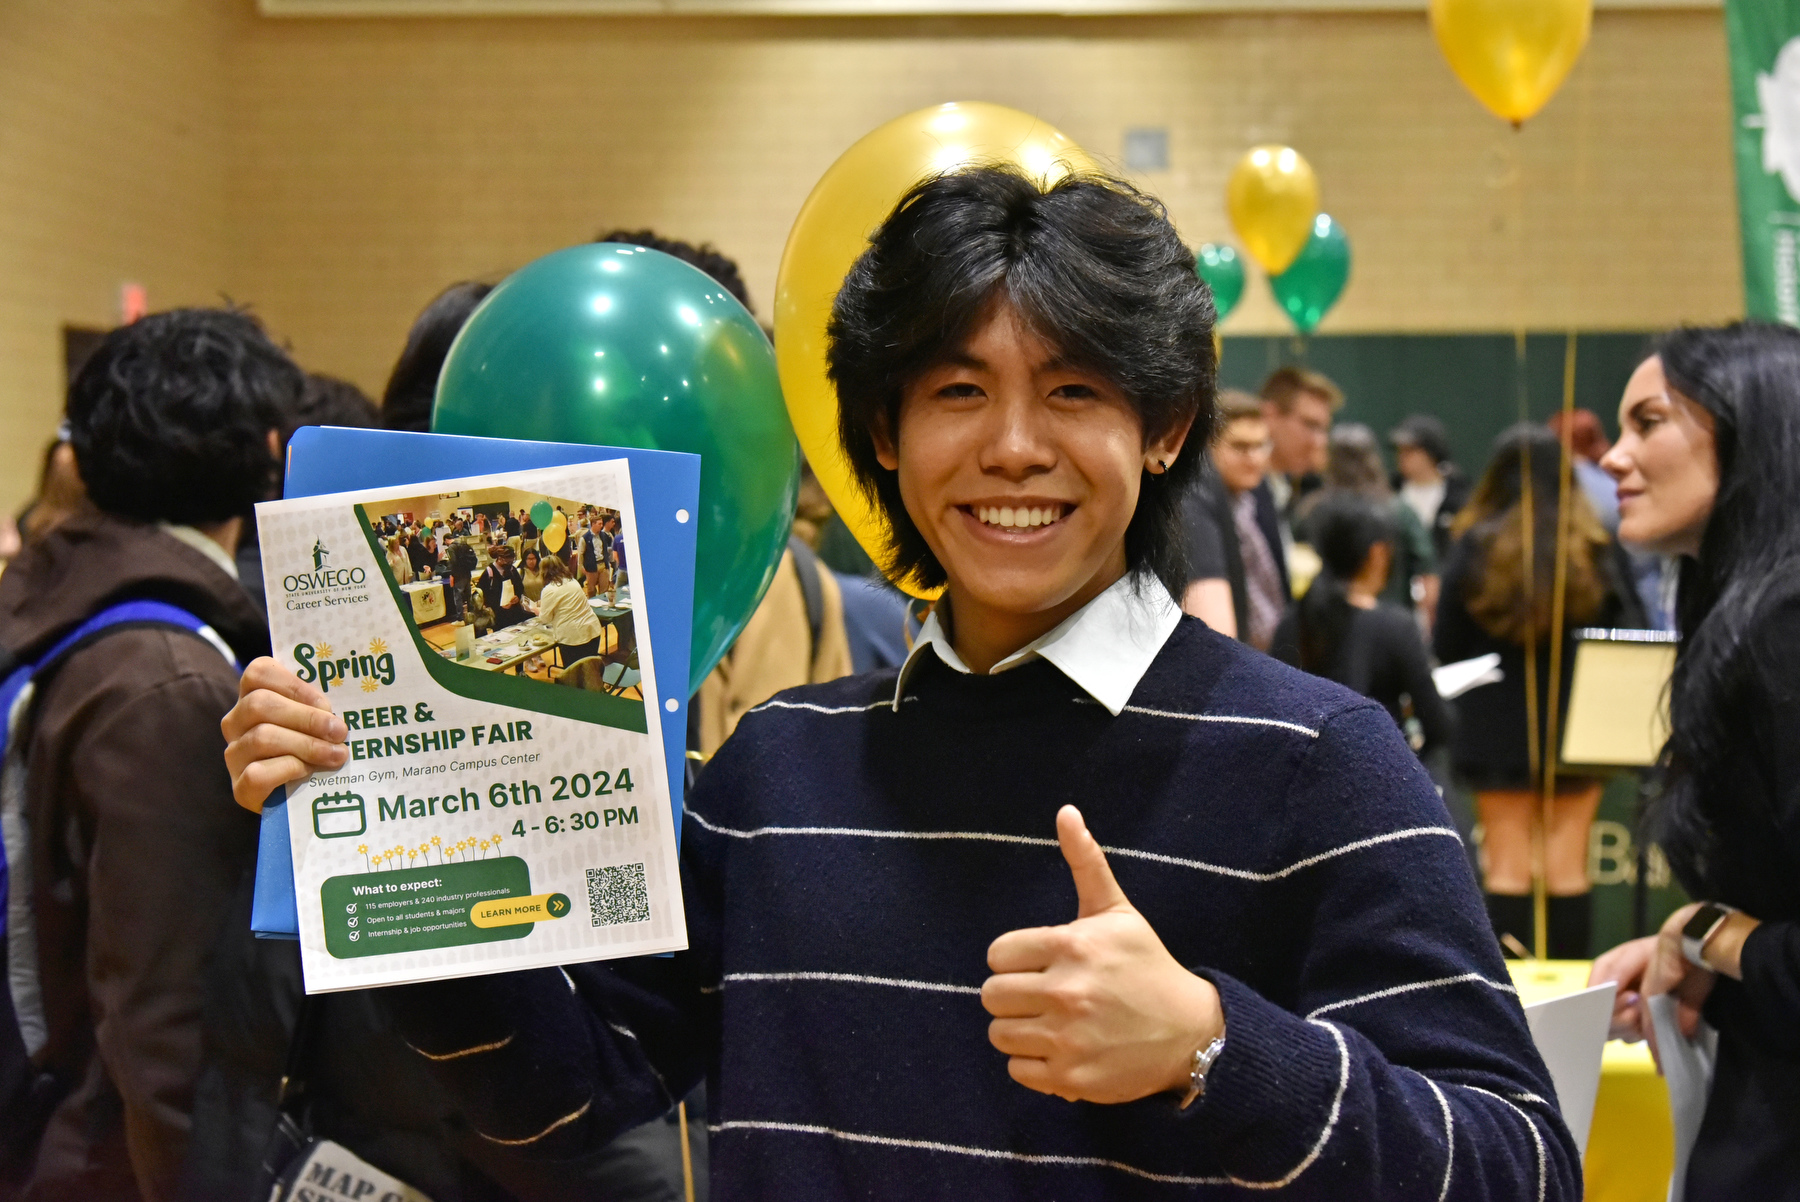 Adrian Almendral, a freshman finance major, shows his enthusiasm for the Spring 2024 Career and Internship Fair held March 6 in the Swetman Gym. Oswego students networked with over 100 employers and professionals at the event hosted by Career Services.